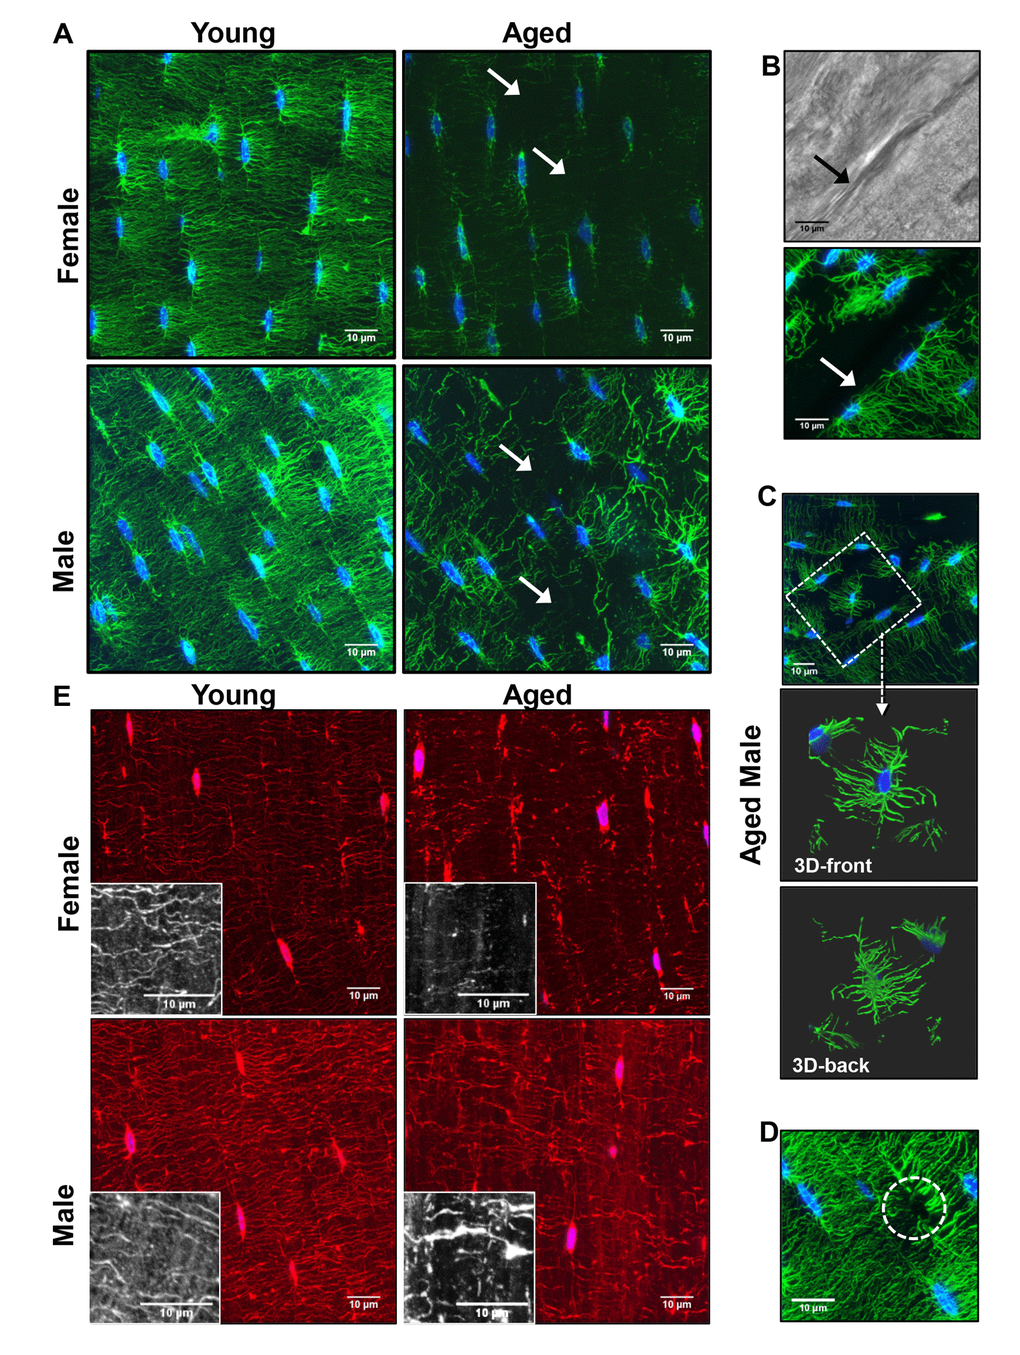 Degeneration of the osteocyte network in aged bone. (A) Maximal Z-projections of 250 planes (32.5μm) from 100x confocal images of phalloidin (green) and DAPI (blue) stained midshaft femur sections showing osteocyte connectivity in young and aged male and female mice. (B) Dendrites do not cross over discontinuities in the bone (arrow) although matrix is present as seen in the corresponding brightfield image. (C) Some osteocytes in aged animals are found in “islands” with few or no connections to the surrounding osteocytes (dashed box). Enlarged images in (C) show a 3D render (front and back) of the same osteocyte confirming its lack of connectivity with surrounding osteocytes. (D) Occasionally dendrites with no visible cell body were seen in the aged mice (dashed circle) suggesting the dendrites may be left behind after apoptosis. (E) Maximal Z-projections of 20 planes (2.6μm) from DiI (red) and DAPI (blue) labeled femur sections showing staining of the osteocyte cell membrane in young and aged mice. Black and white insets show lipid material in the matrix around the dendrites. (Bars = 10μm).